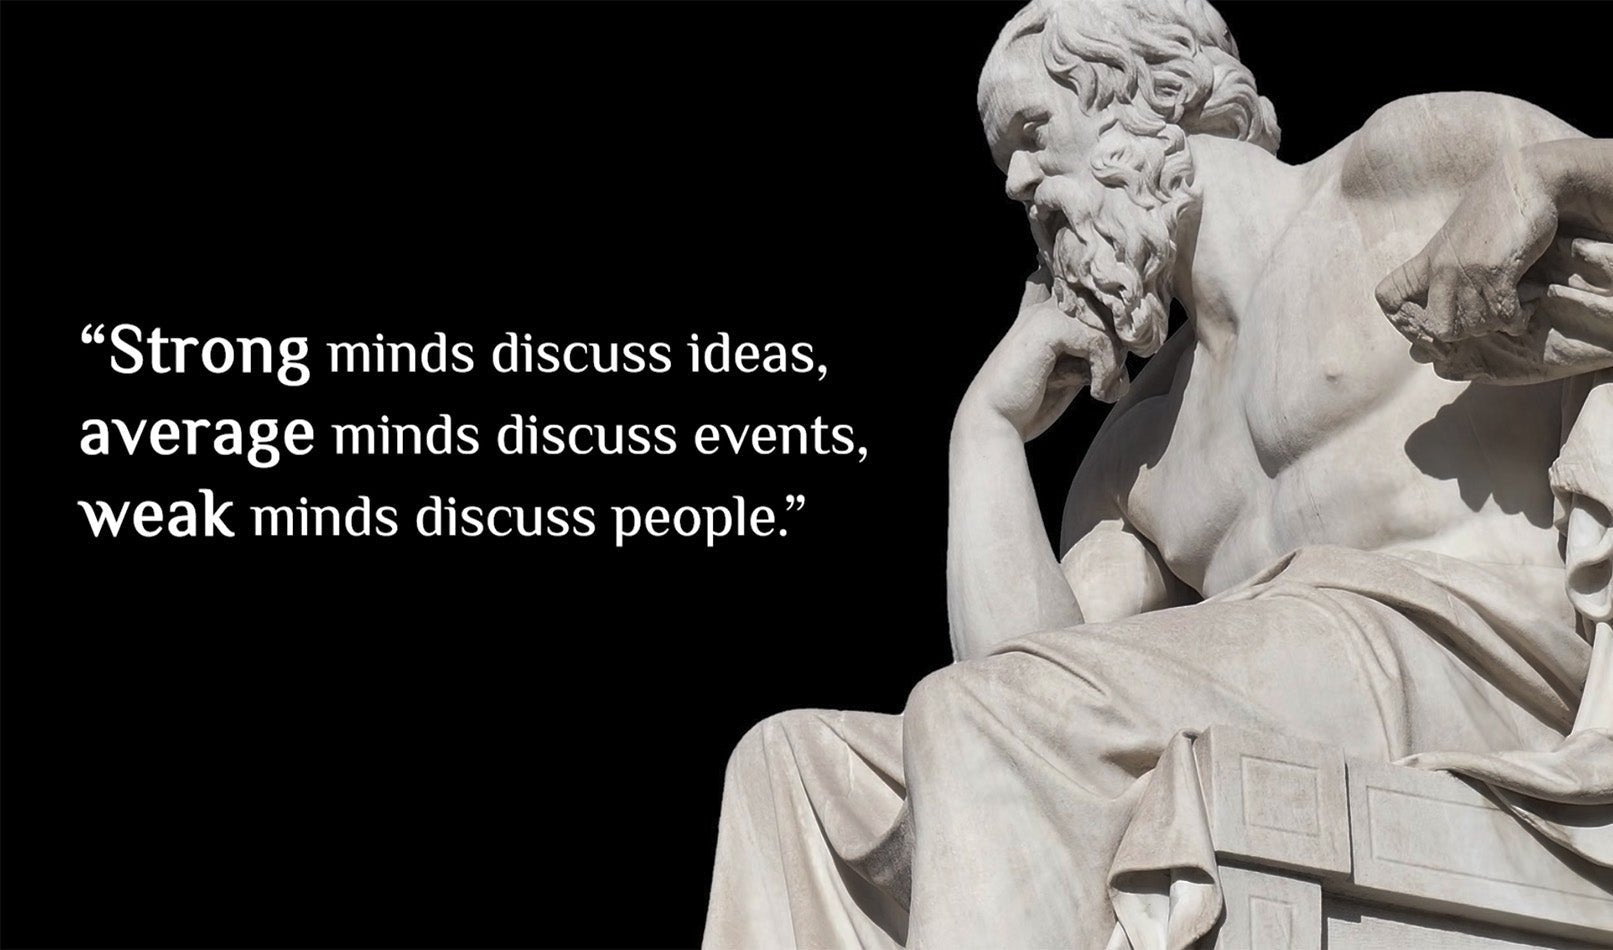 Ancient Wisdom: Brilliant Pieces Of Advice From Socrates - DSF Antique Jewelry